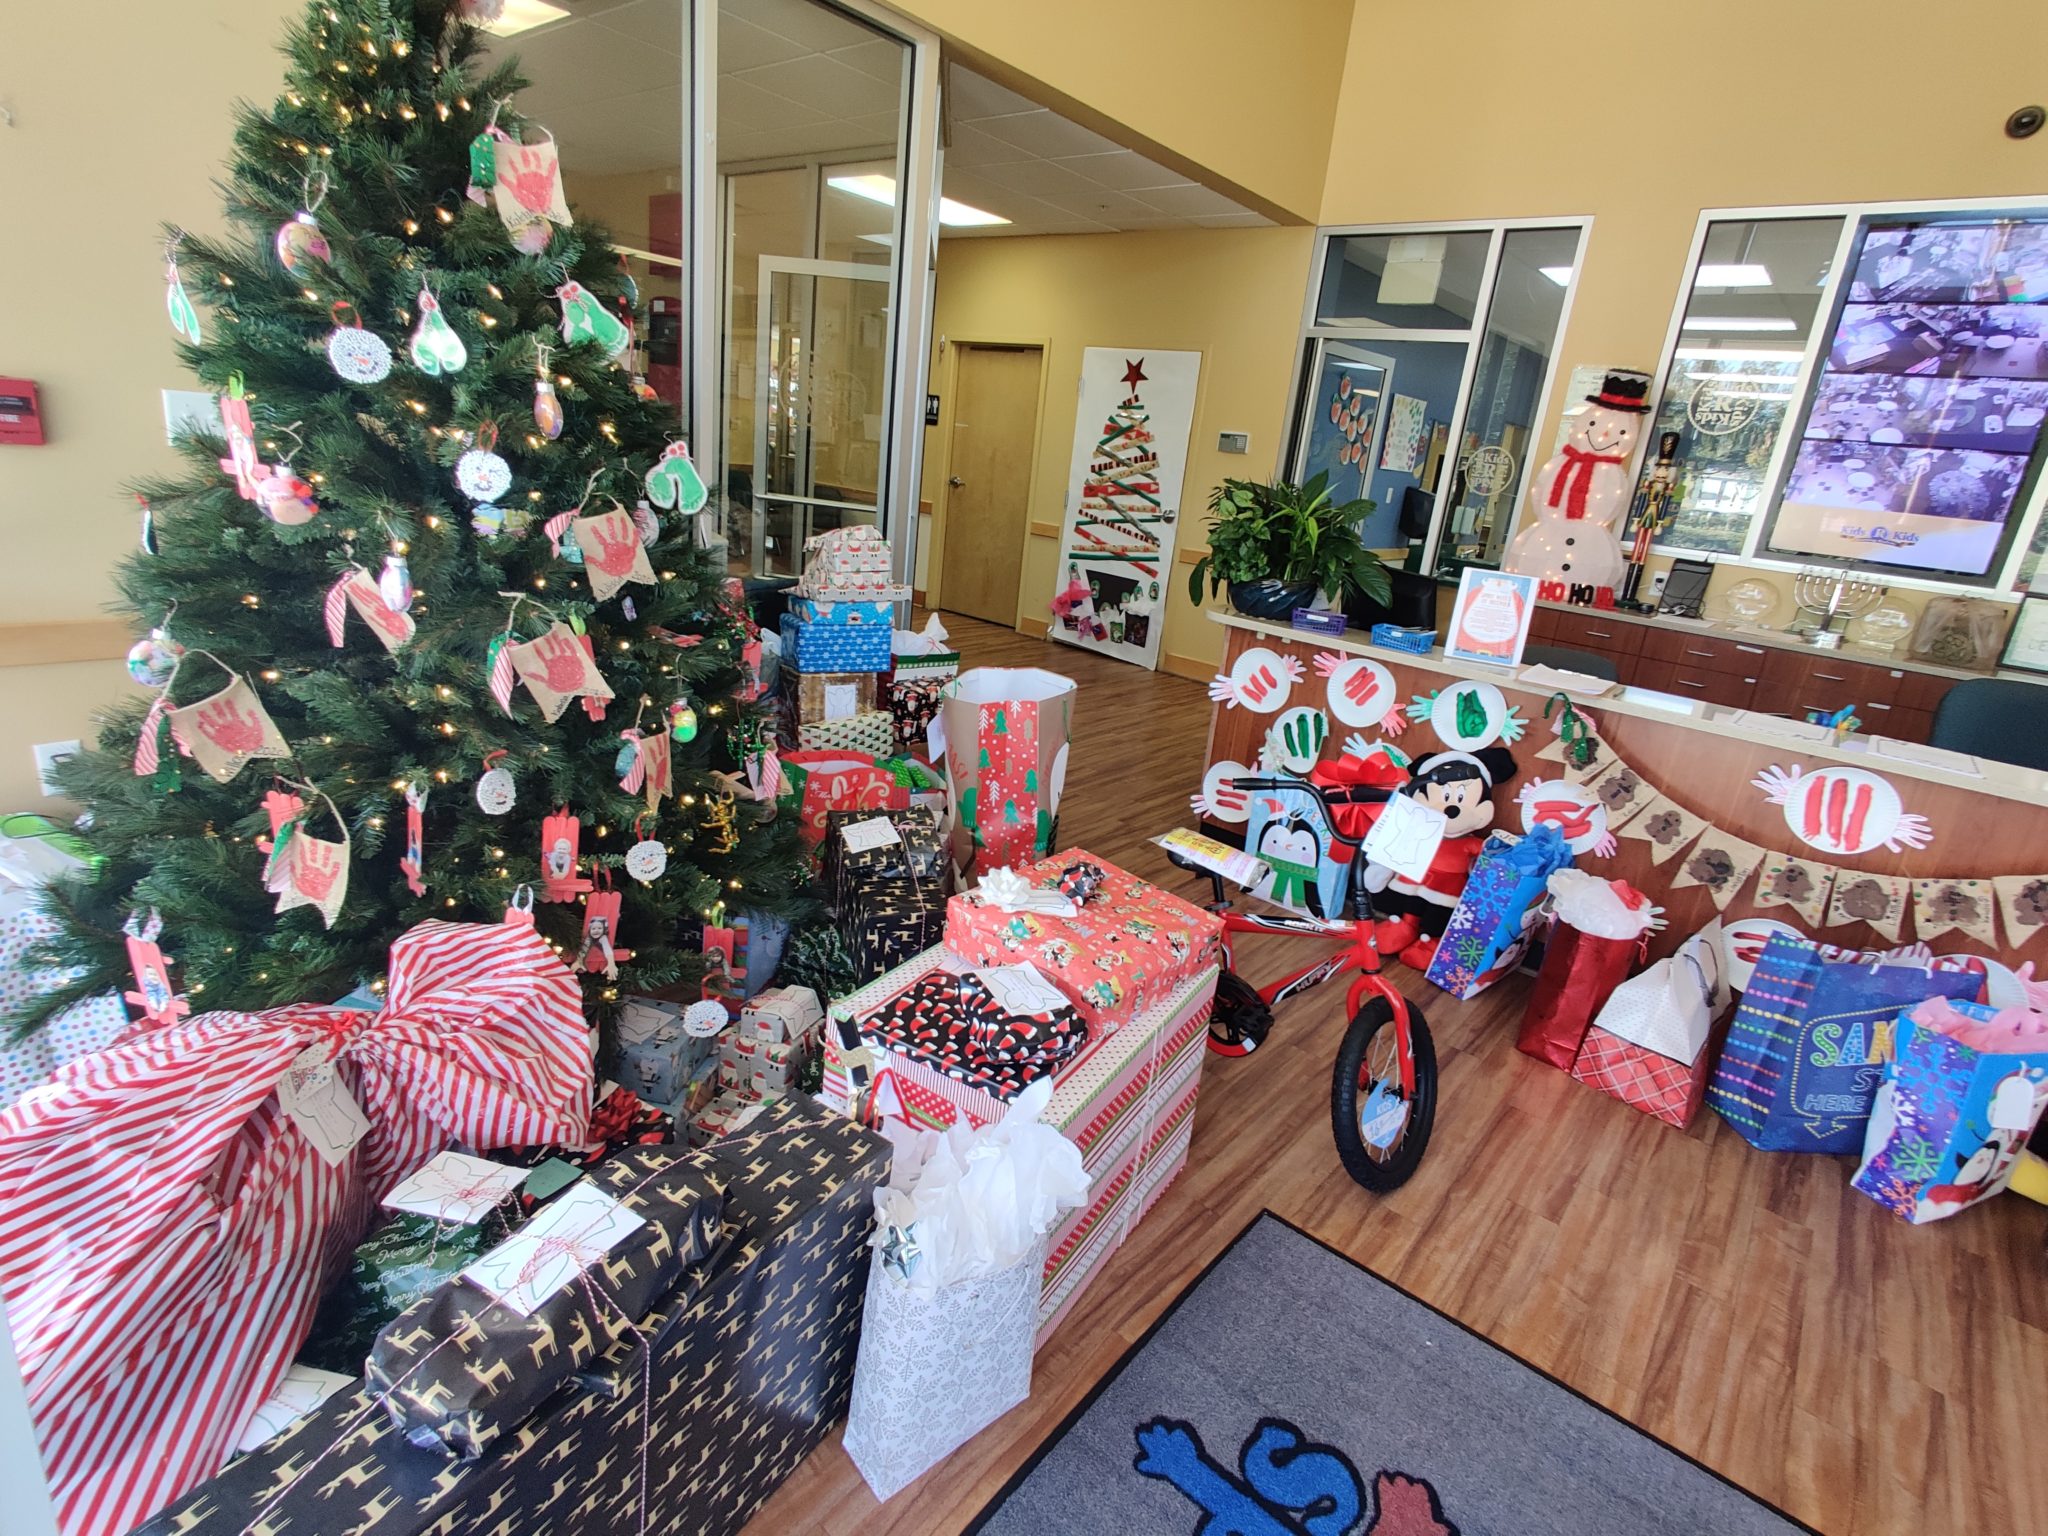 Kids ‘R’ Kids Angel Tree Produces Gifts For 150 Foster Kids Thanks To